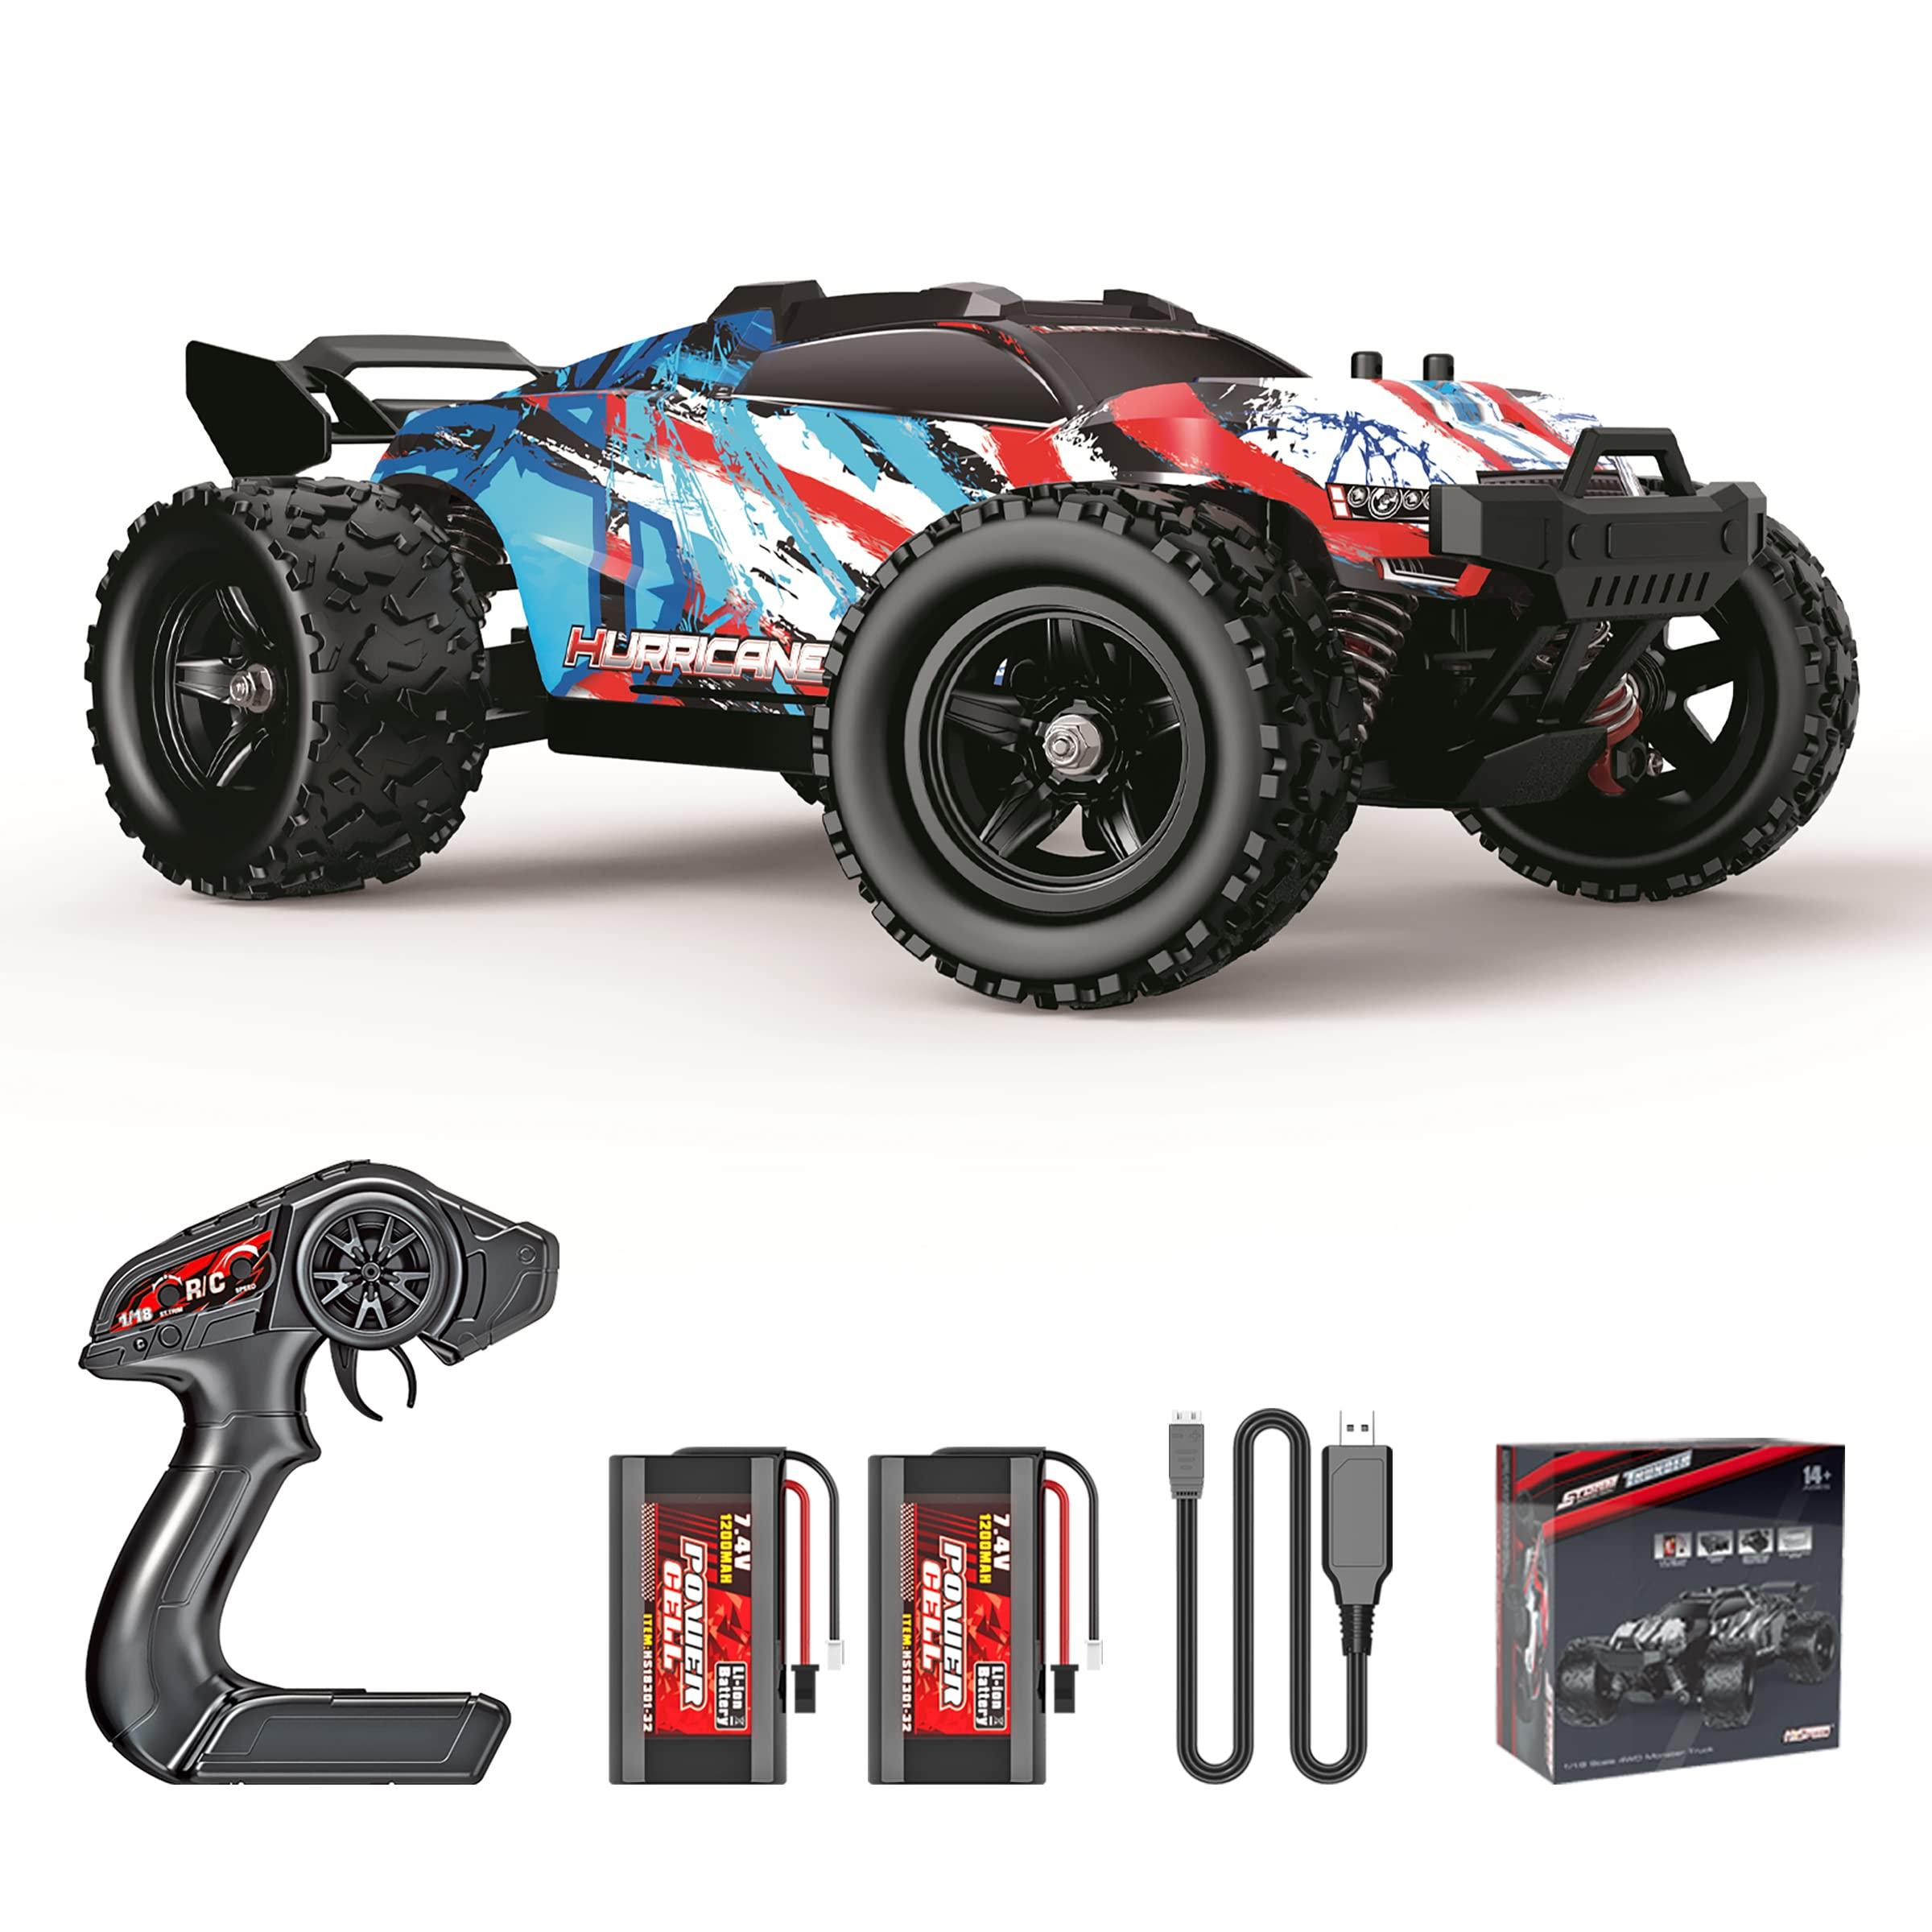 Electric Car Toy Remote Control: Unlocking the Benefits of Electric Car Toy Remote Controls